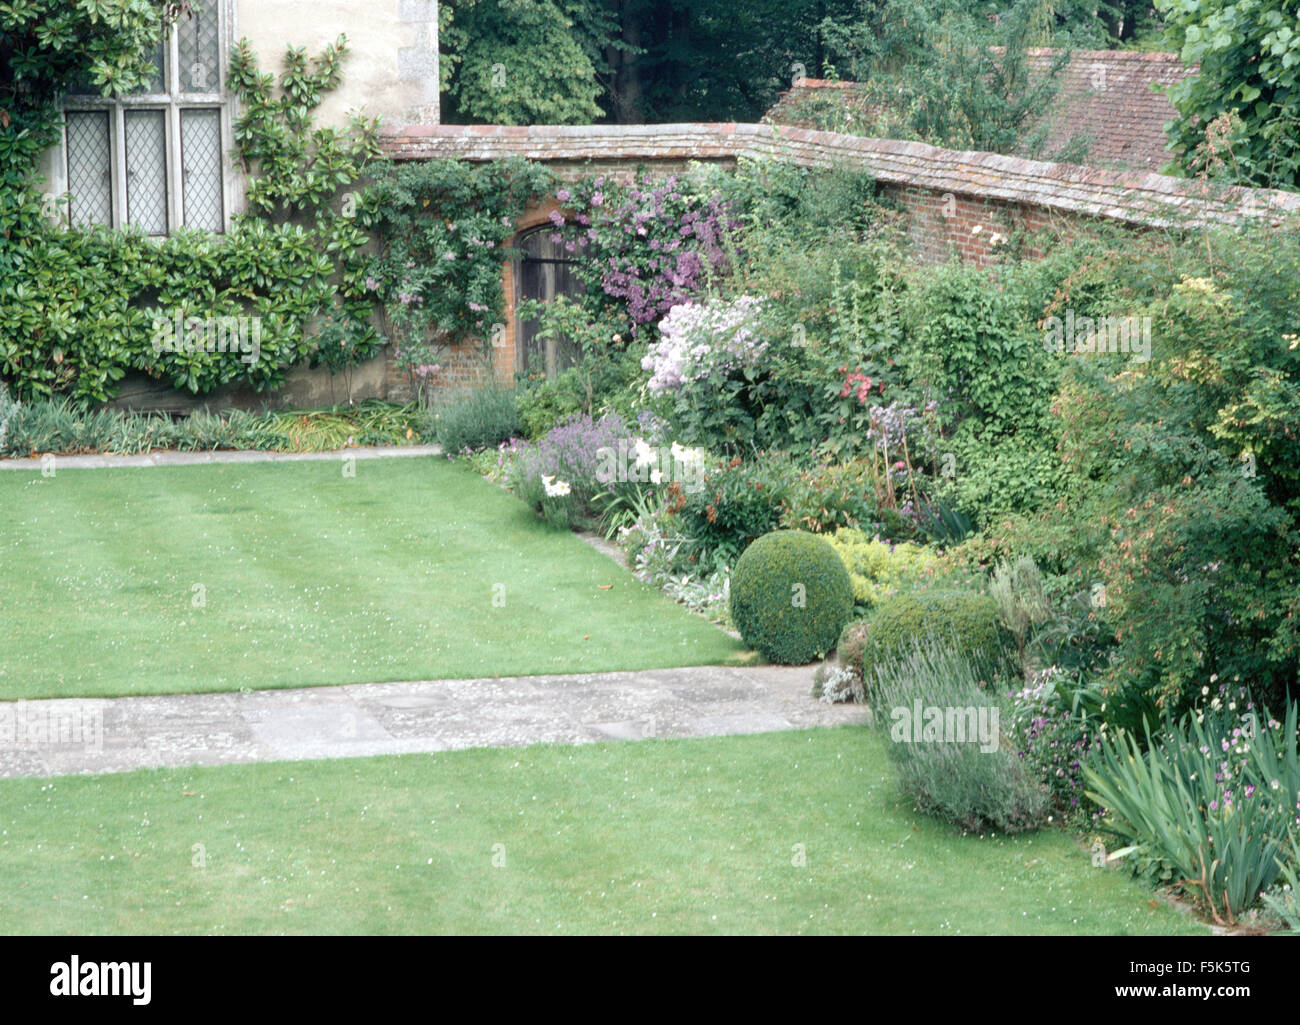 Neat lawns either side of paved path in a walled country garden with clipped box balls and purple clematis Stock Photo